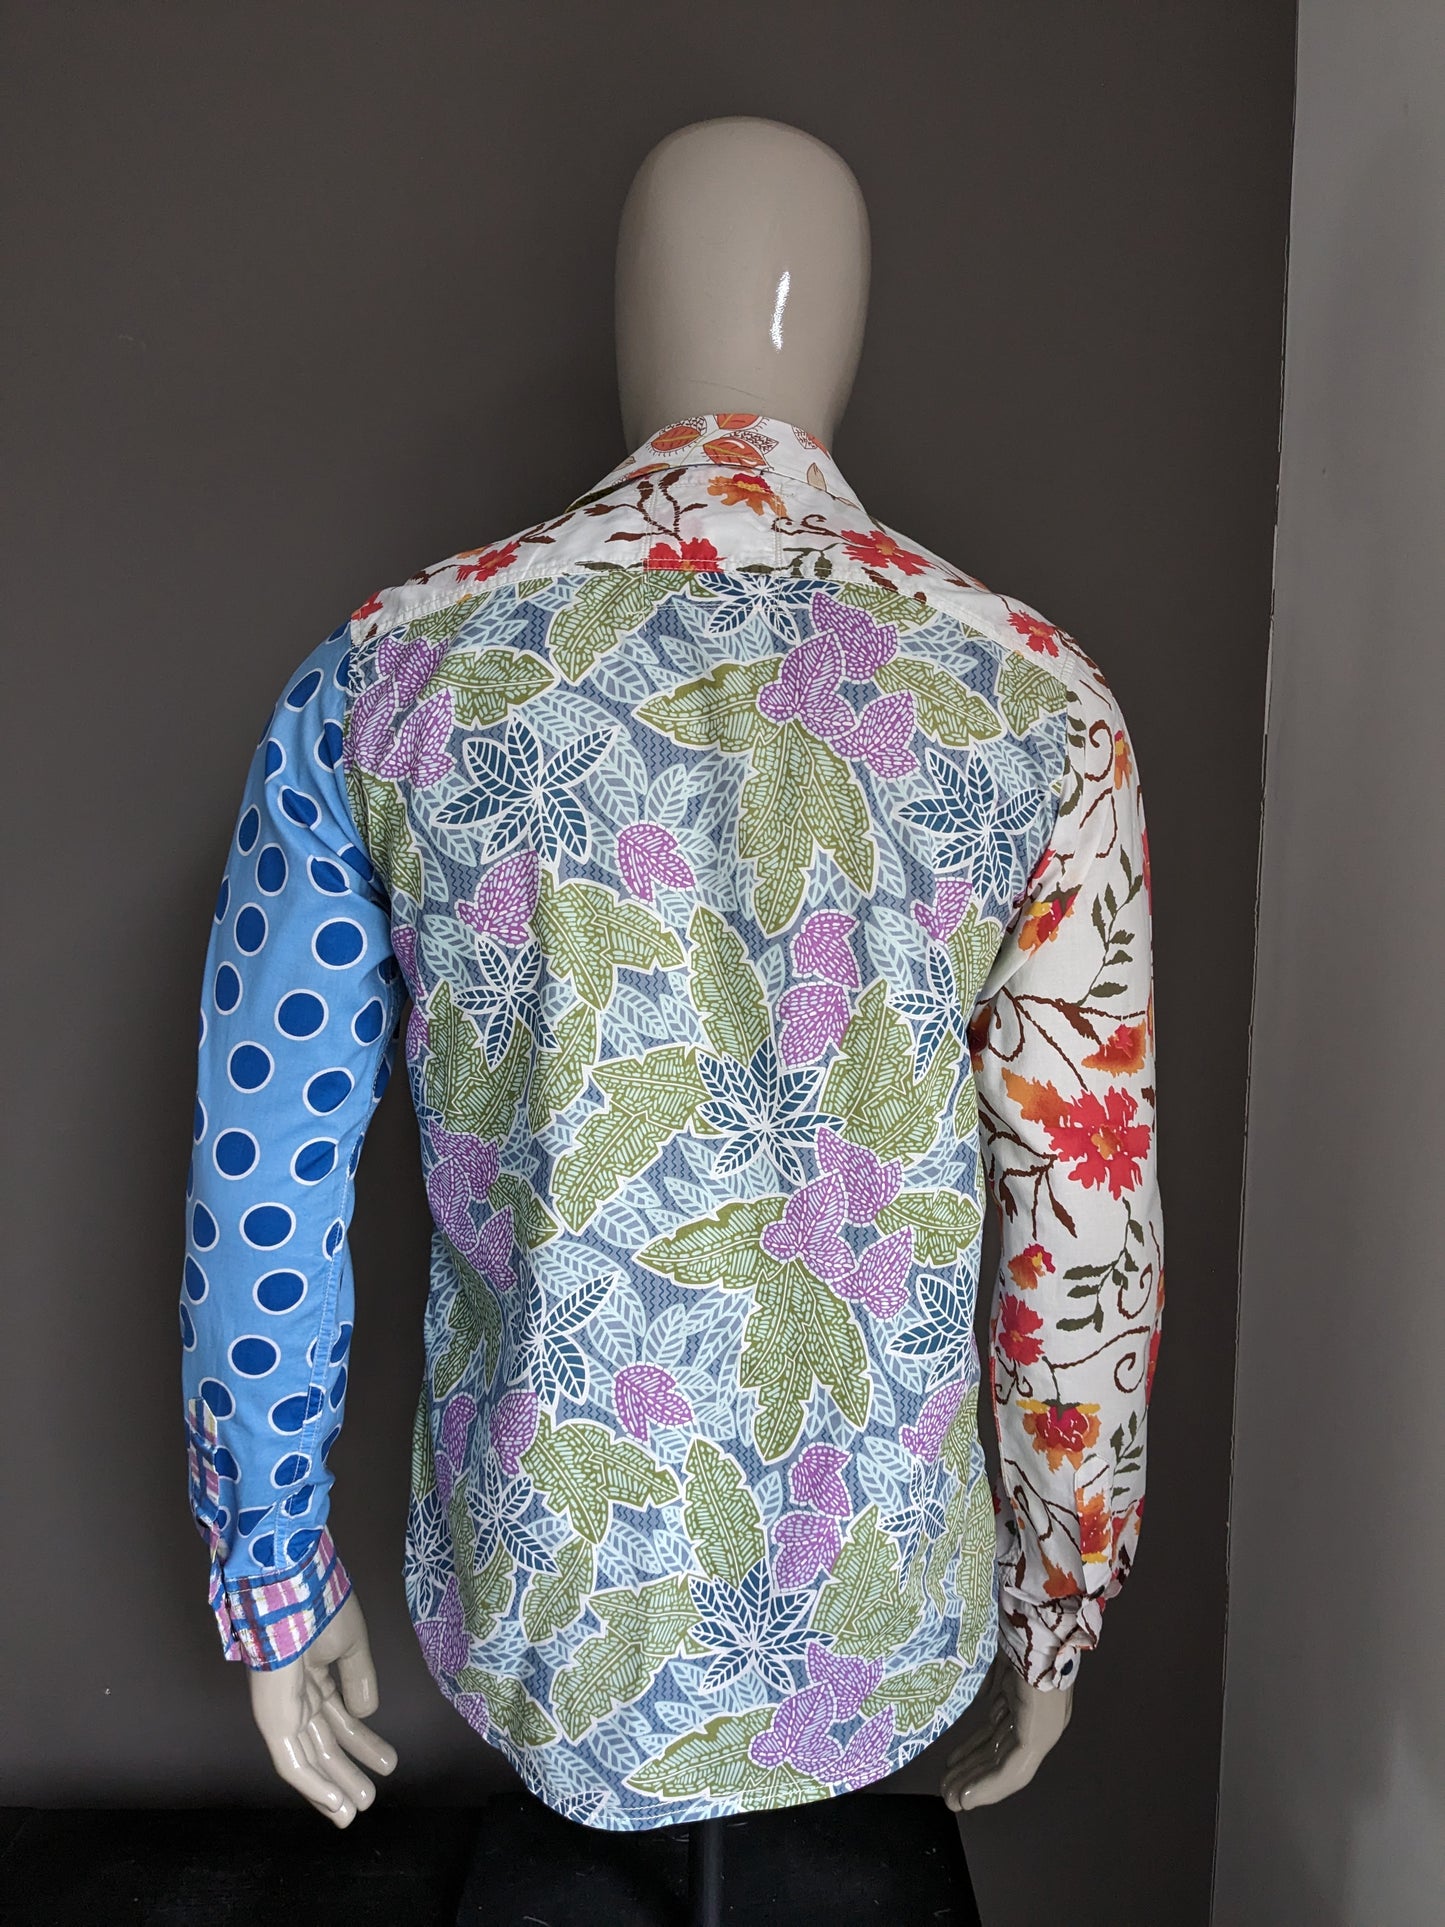 Desigual shirt with press studs. Blue brown red green print. Size M.